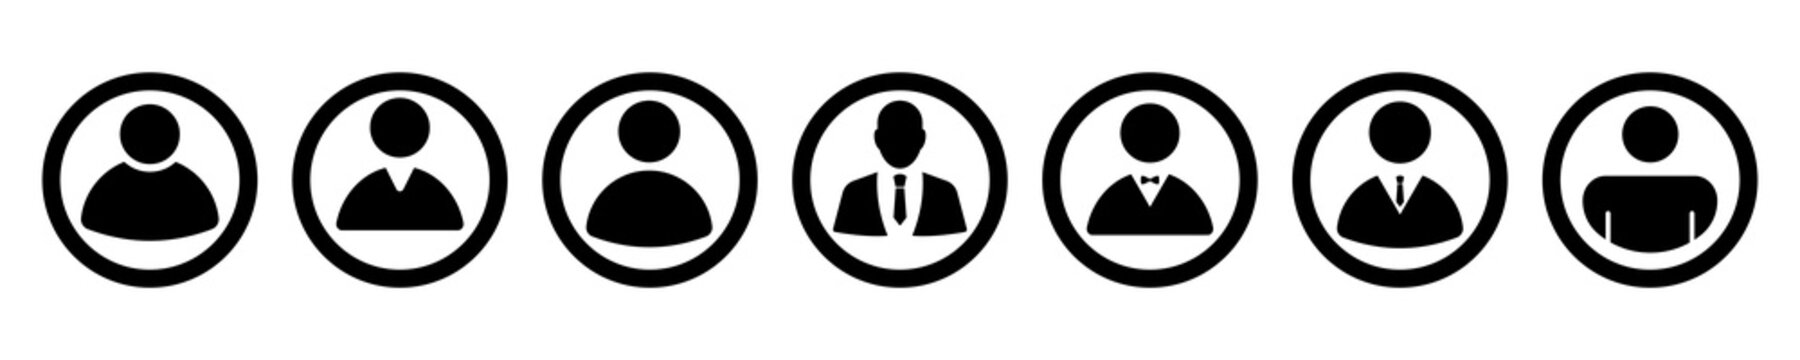 User, profile, avatar vector icons for website. Black admin pictograms for web apps. Vector 10 EPS.